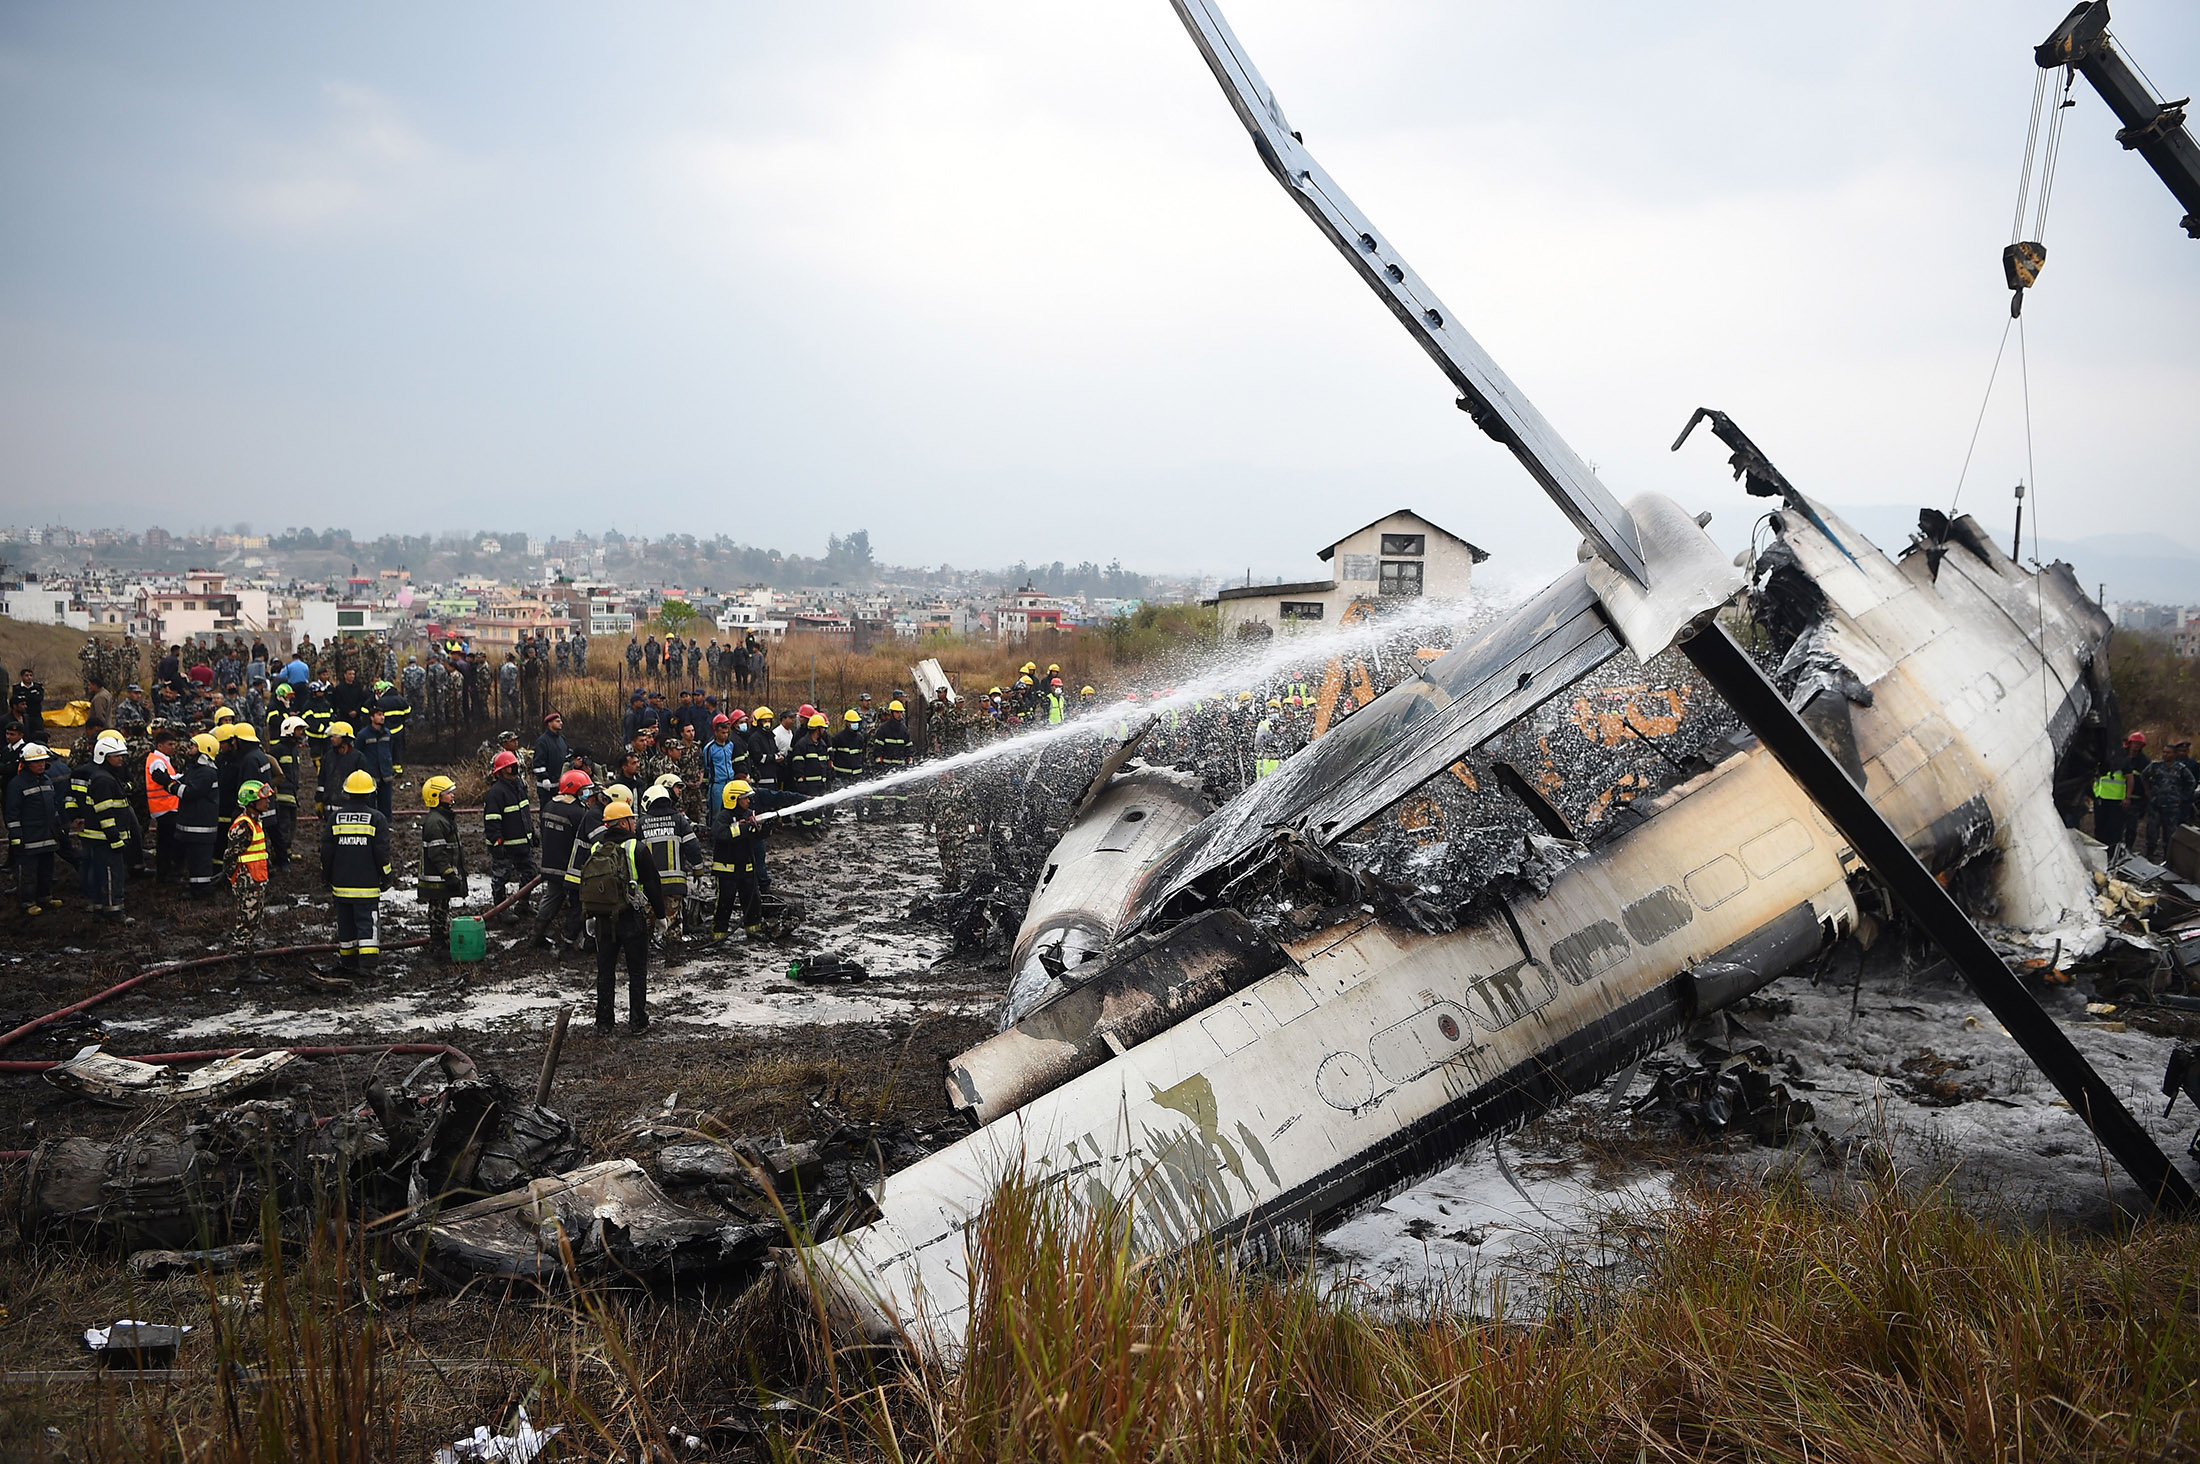 Rescue workers gather around the debris of an airplane that crashed near the international airport in Kathmandu on March 12.